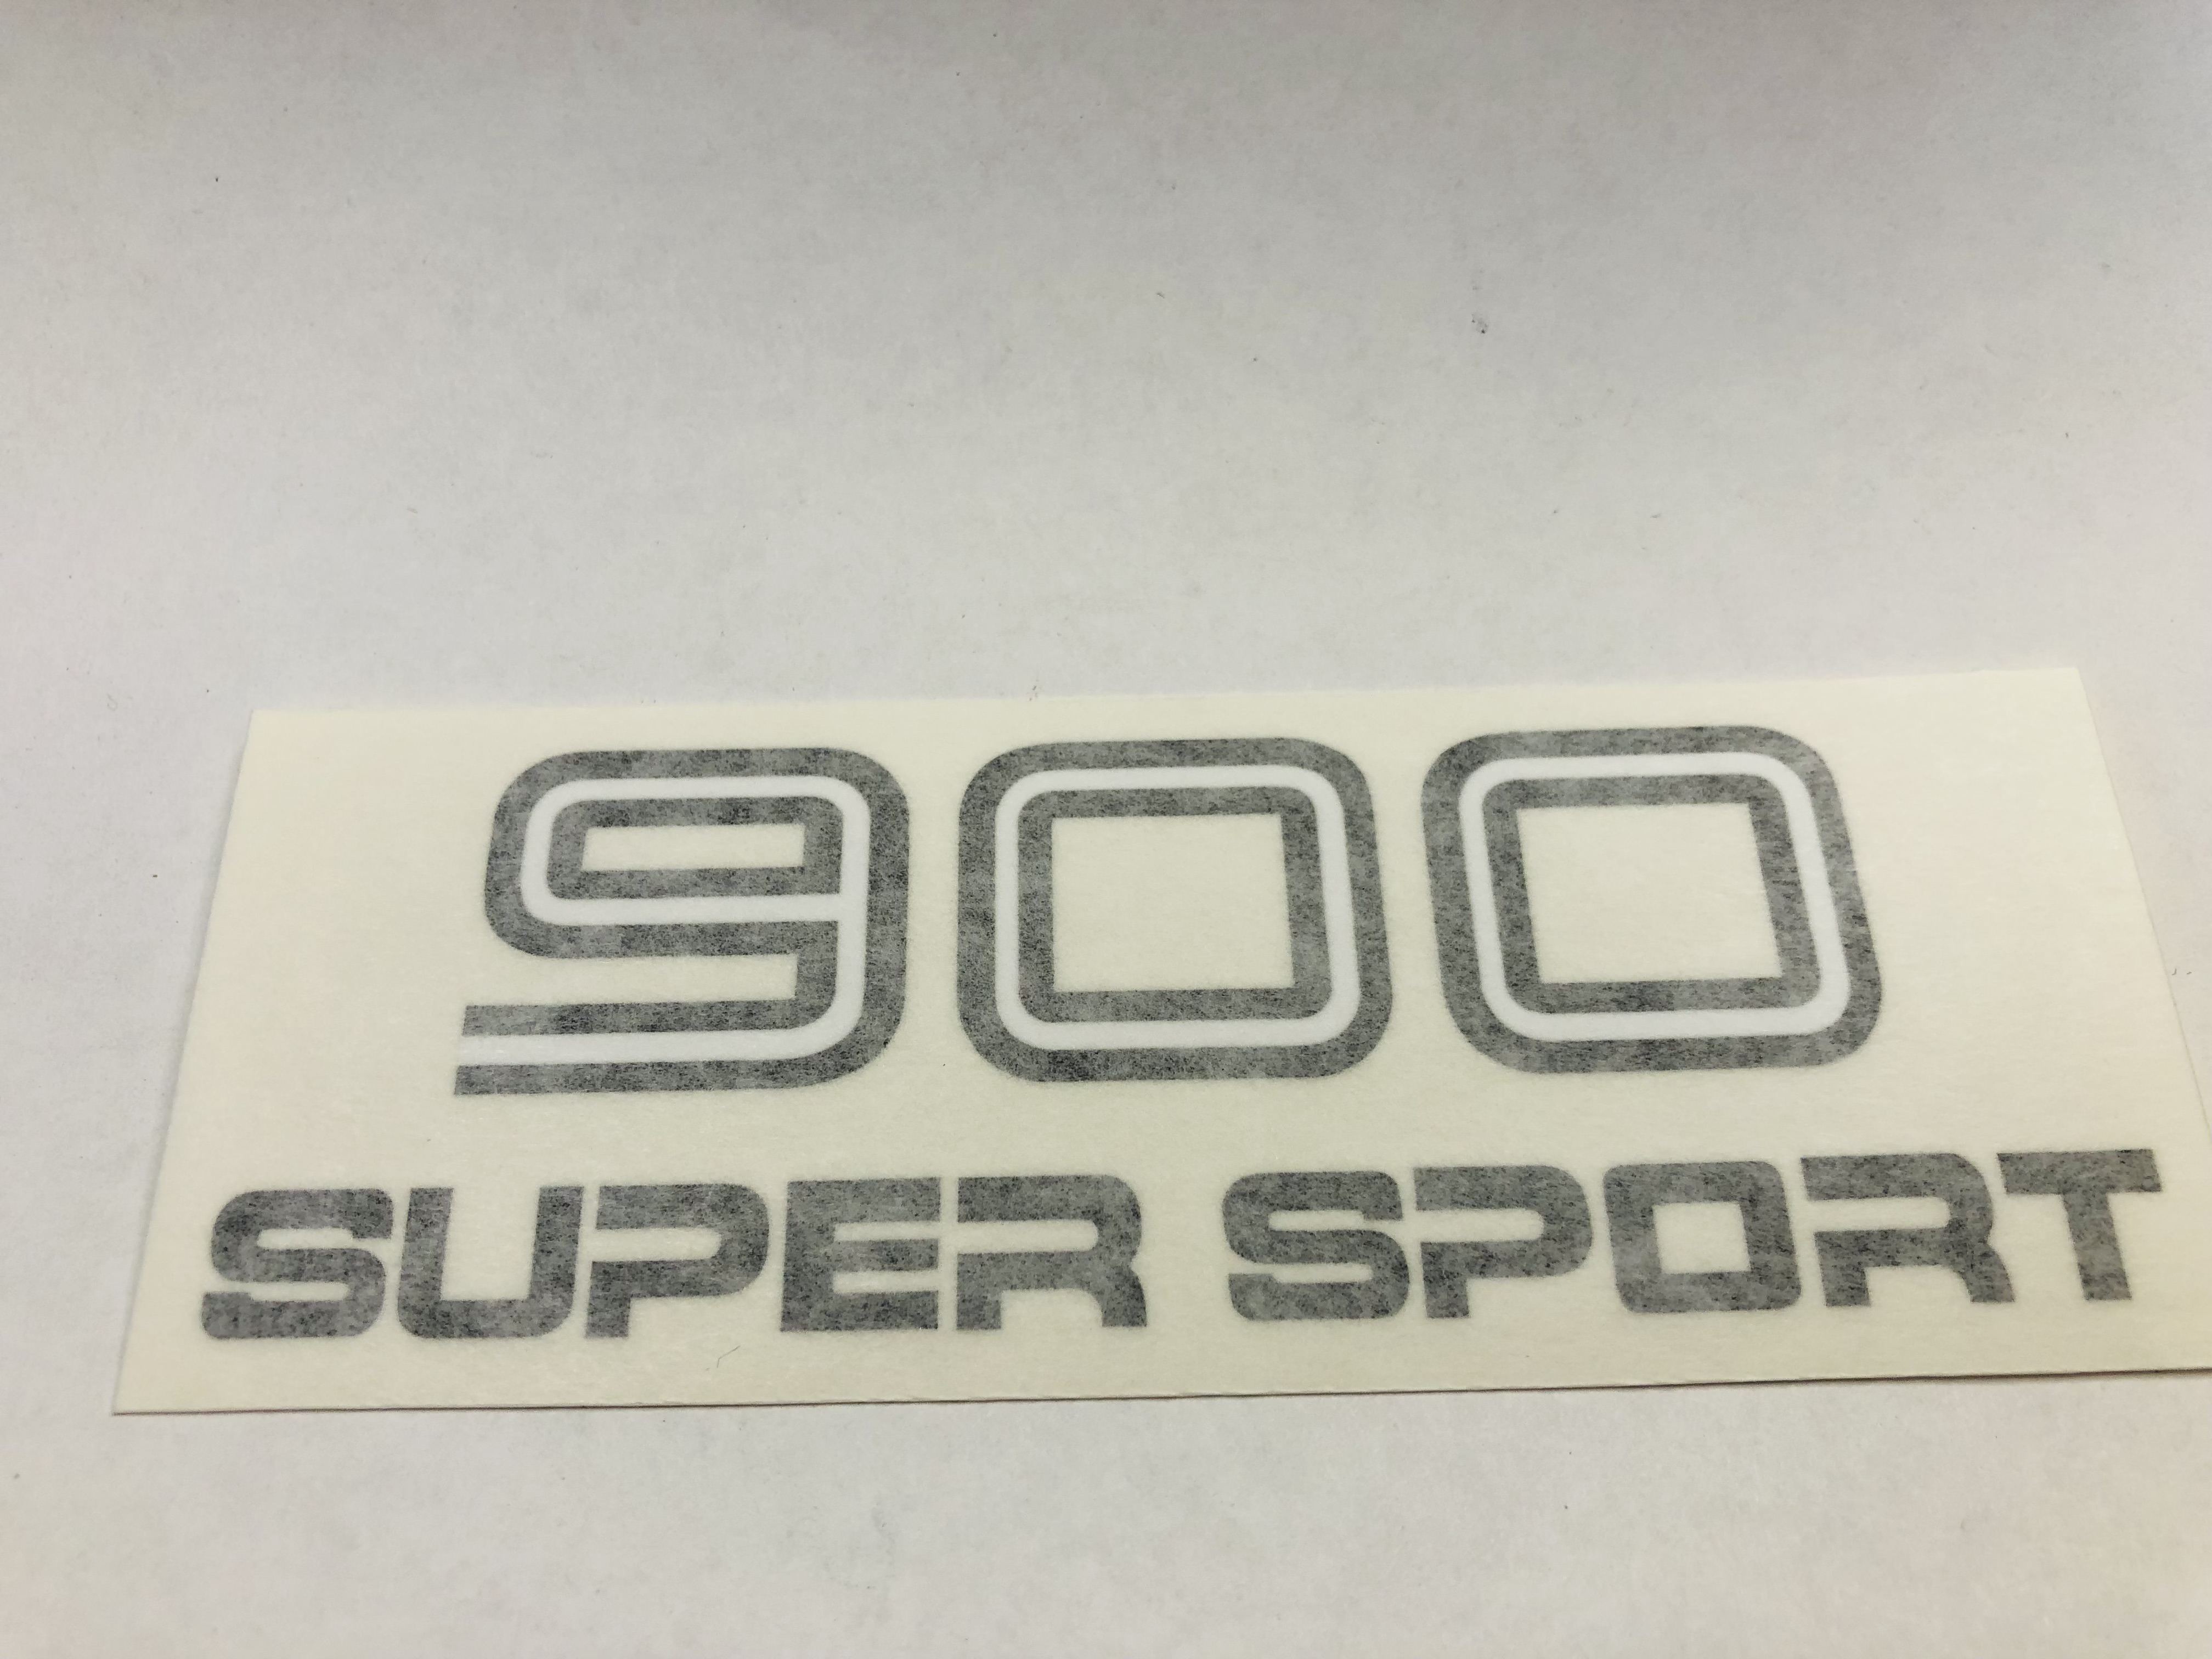 900ss side panel decal black & white 75-78